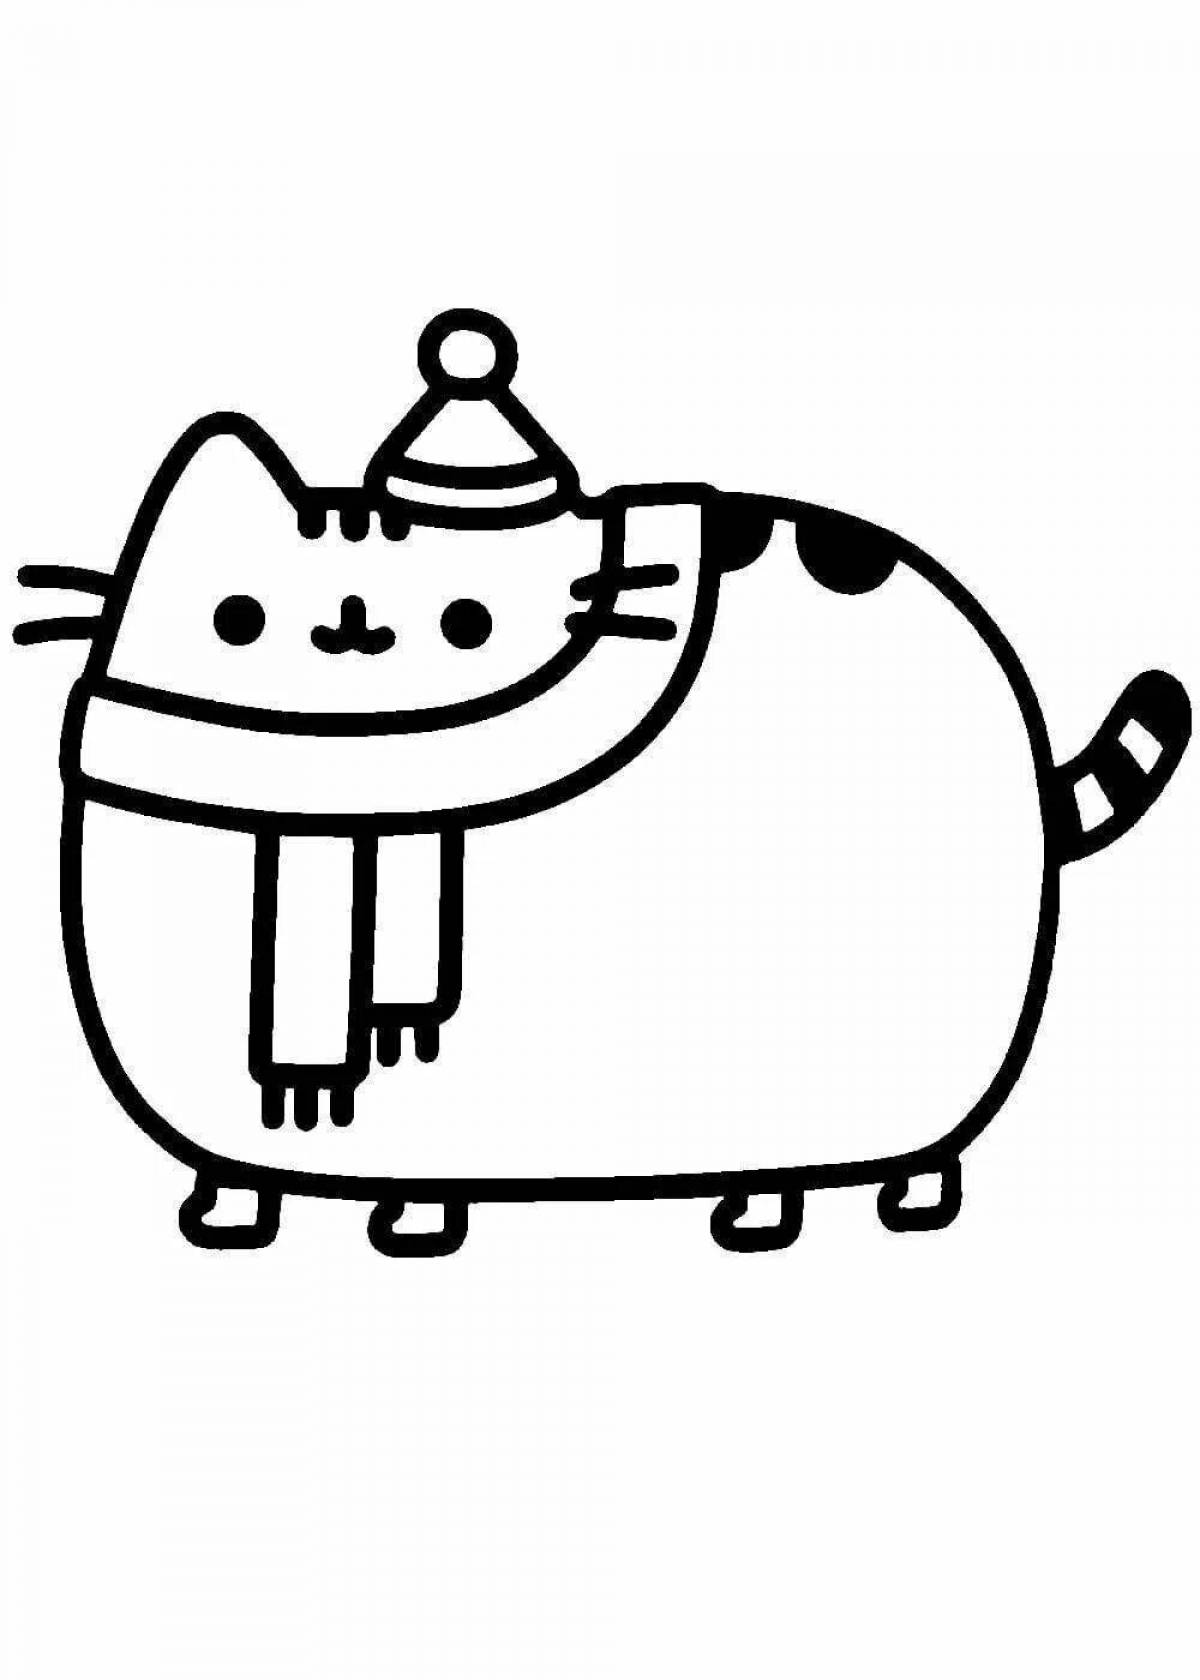 Coloring page playful chubby cat